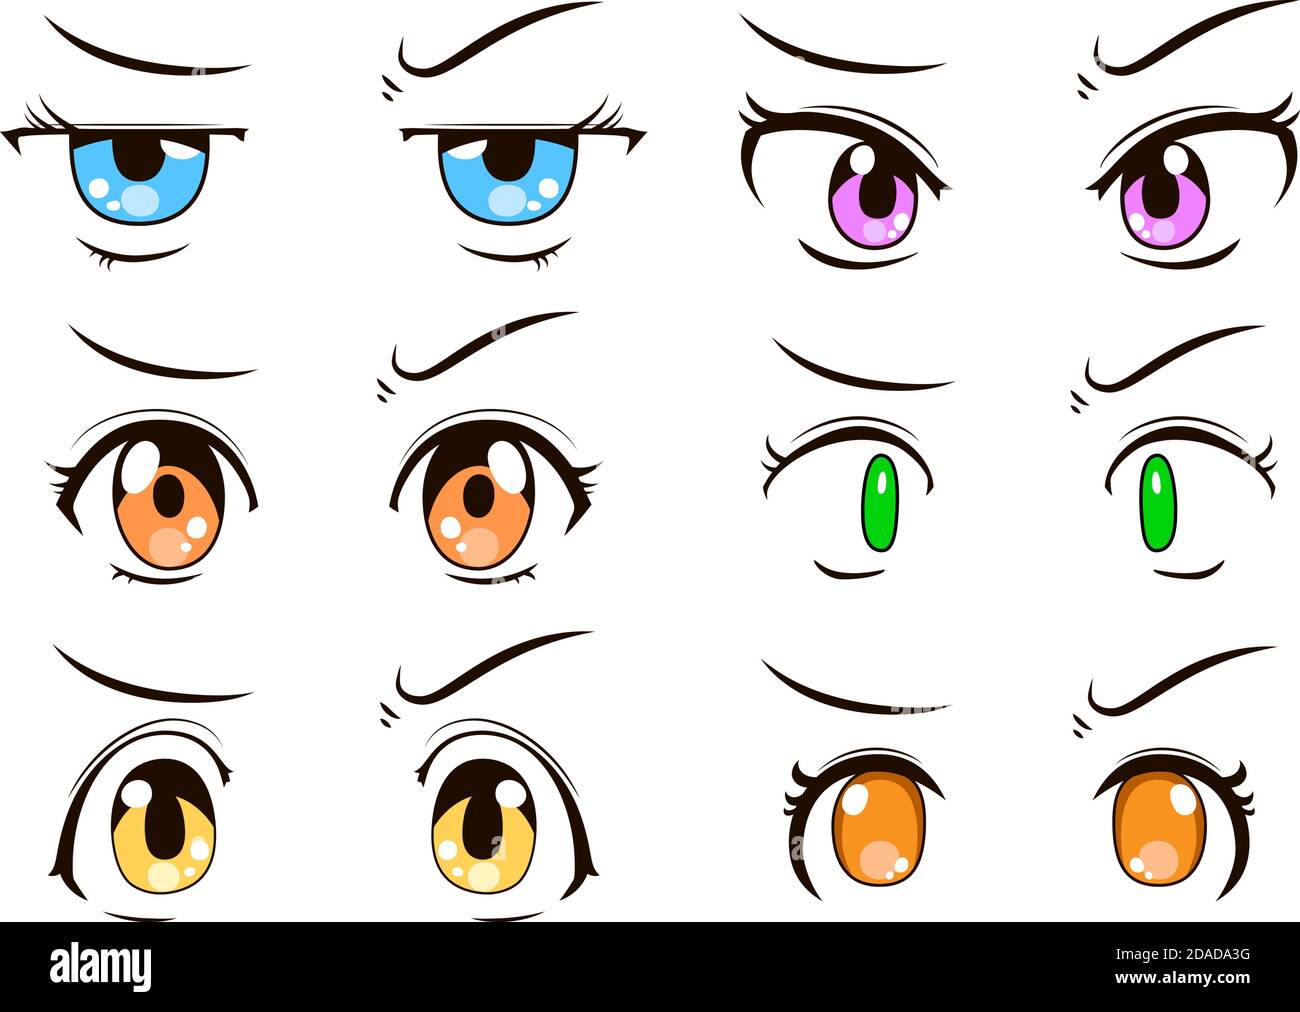 This is a illustration of Cute anime-style eyes with a suspicious ...